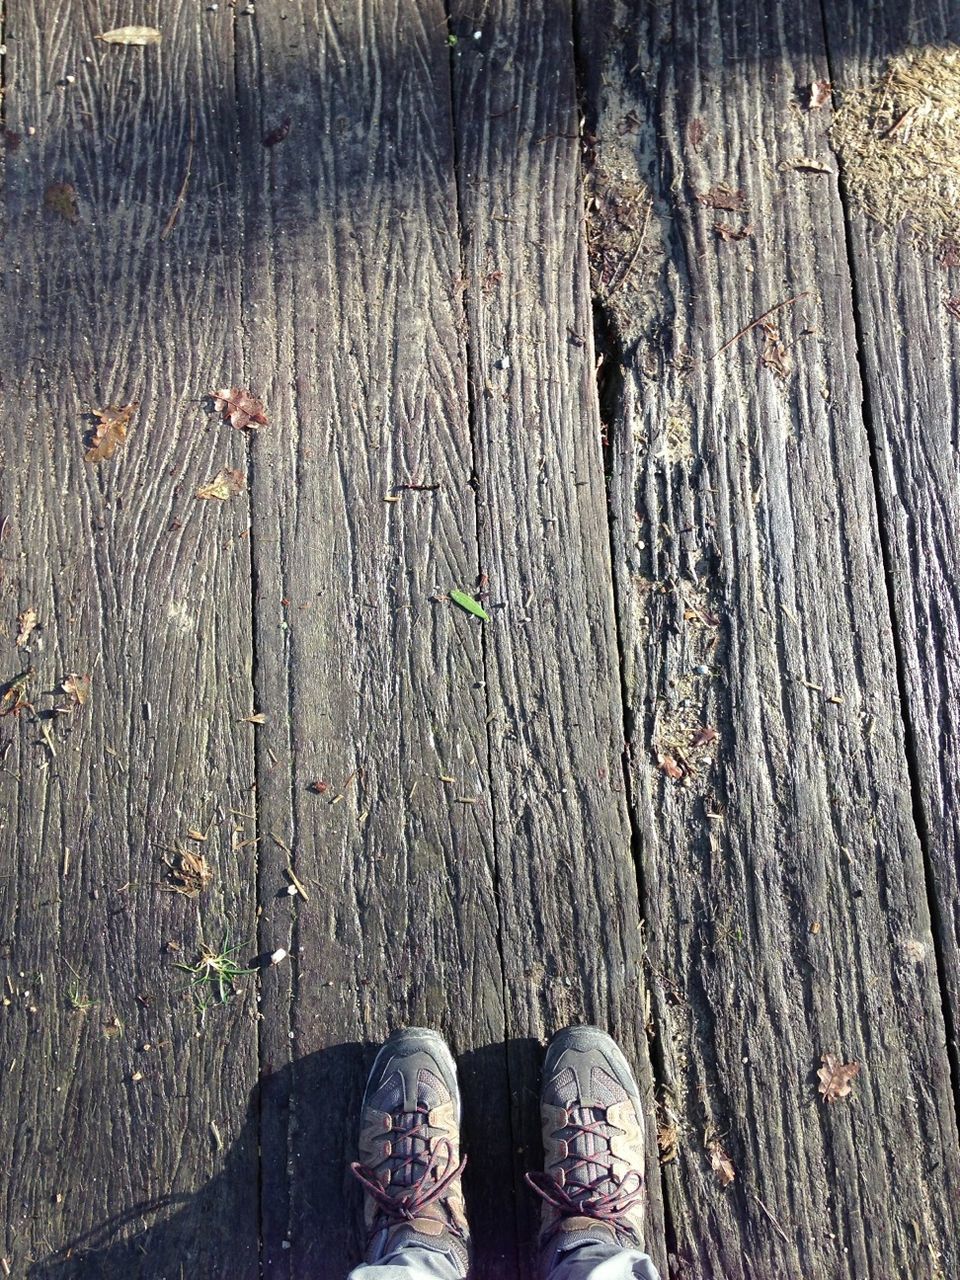 low section, person, shoe, personal perspective, standing, wood - material, human foot, footwear, lifestyles, wooden, high angle view, men, unrecognizable person, boardwalk, jeans, leisure activity, plank